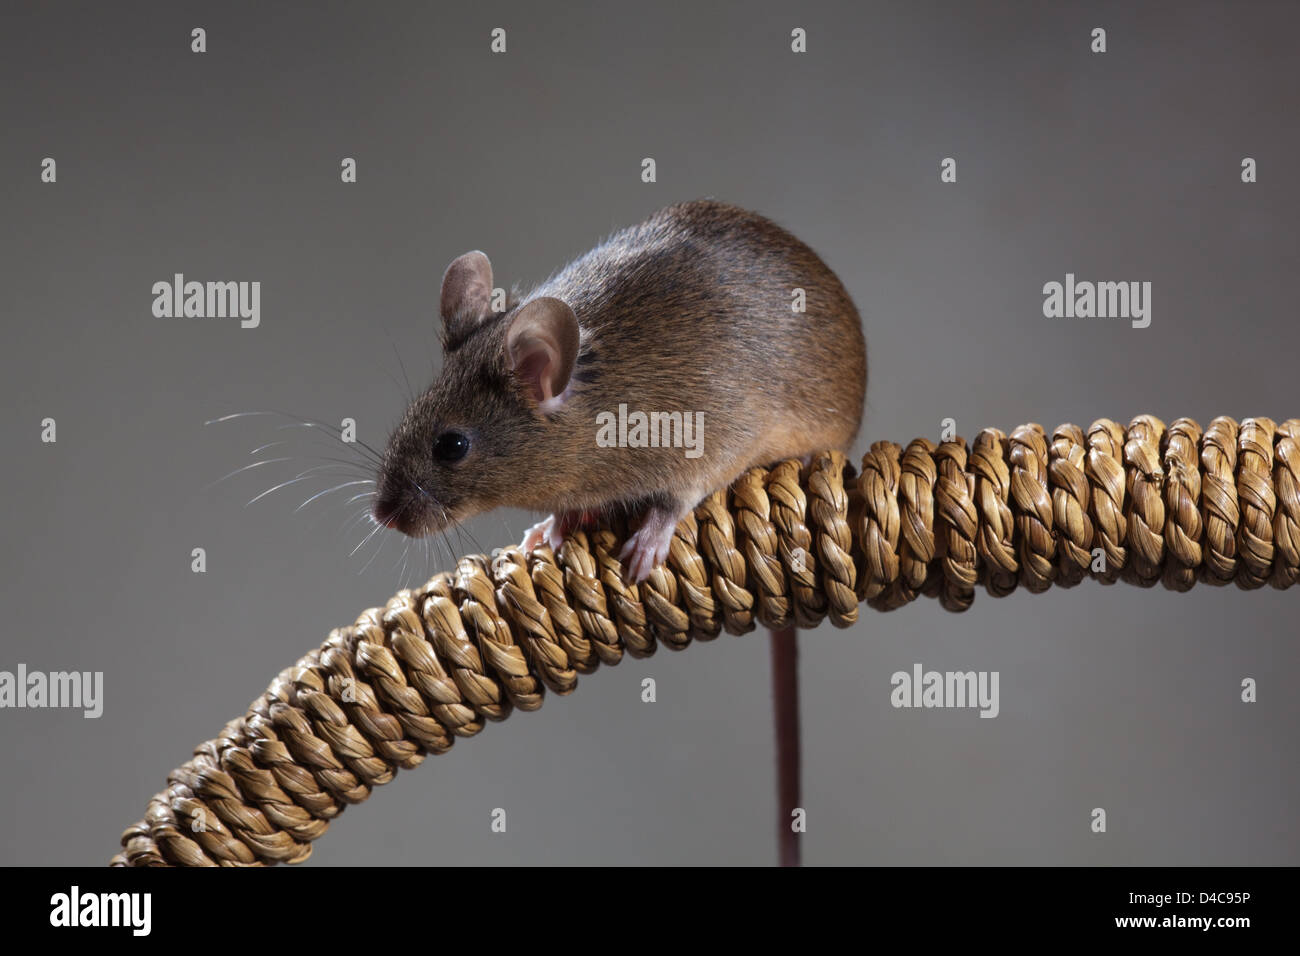 HOUSE MOUSE Mus musculus. Stock Photo